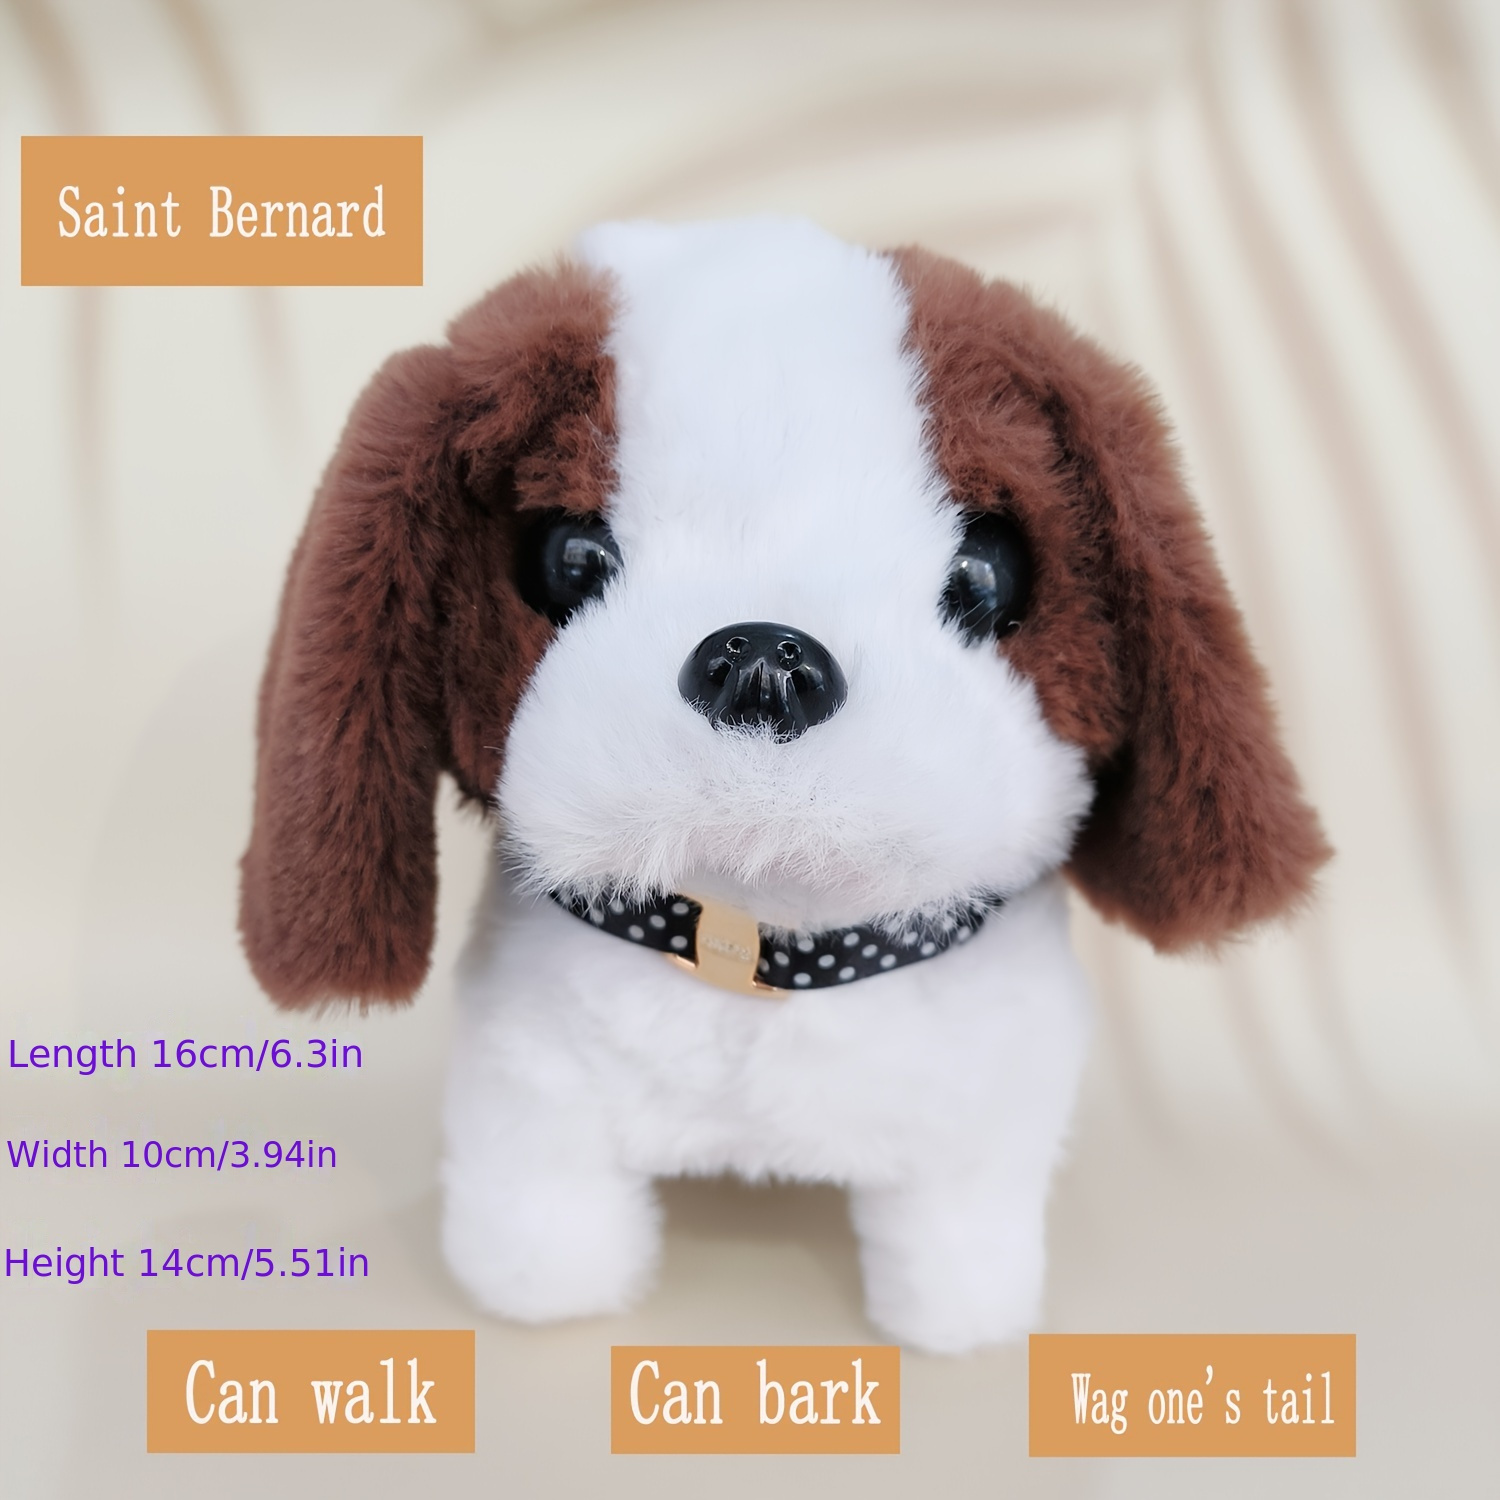 Super Cute Realistic Robot Dog Interactive Toy Dog Plush Electric